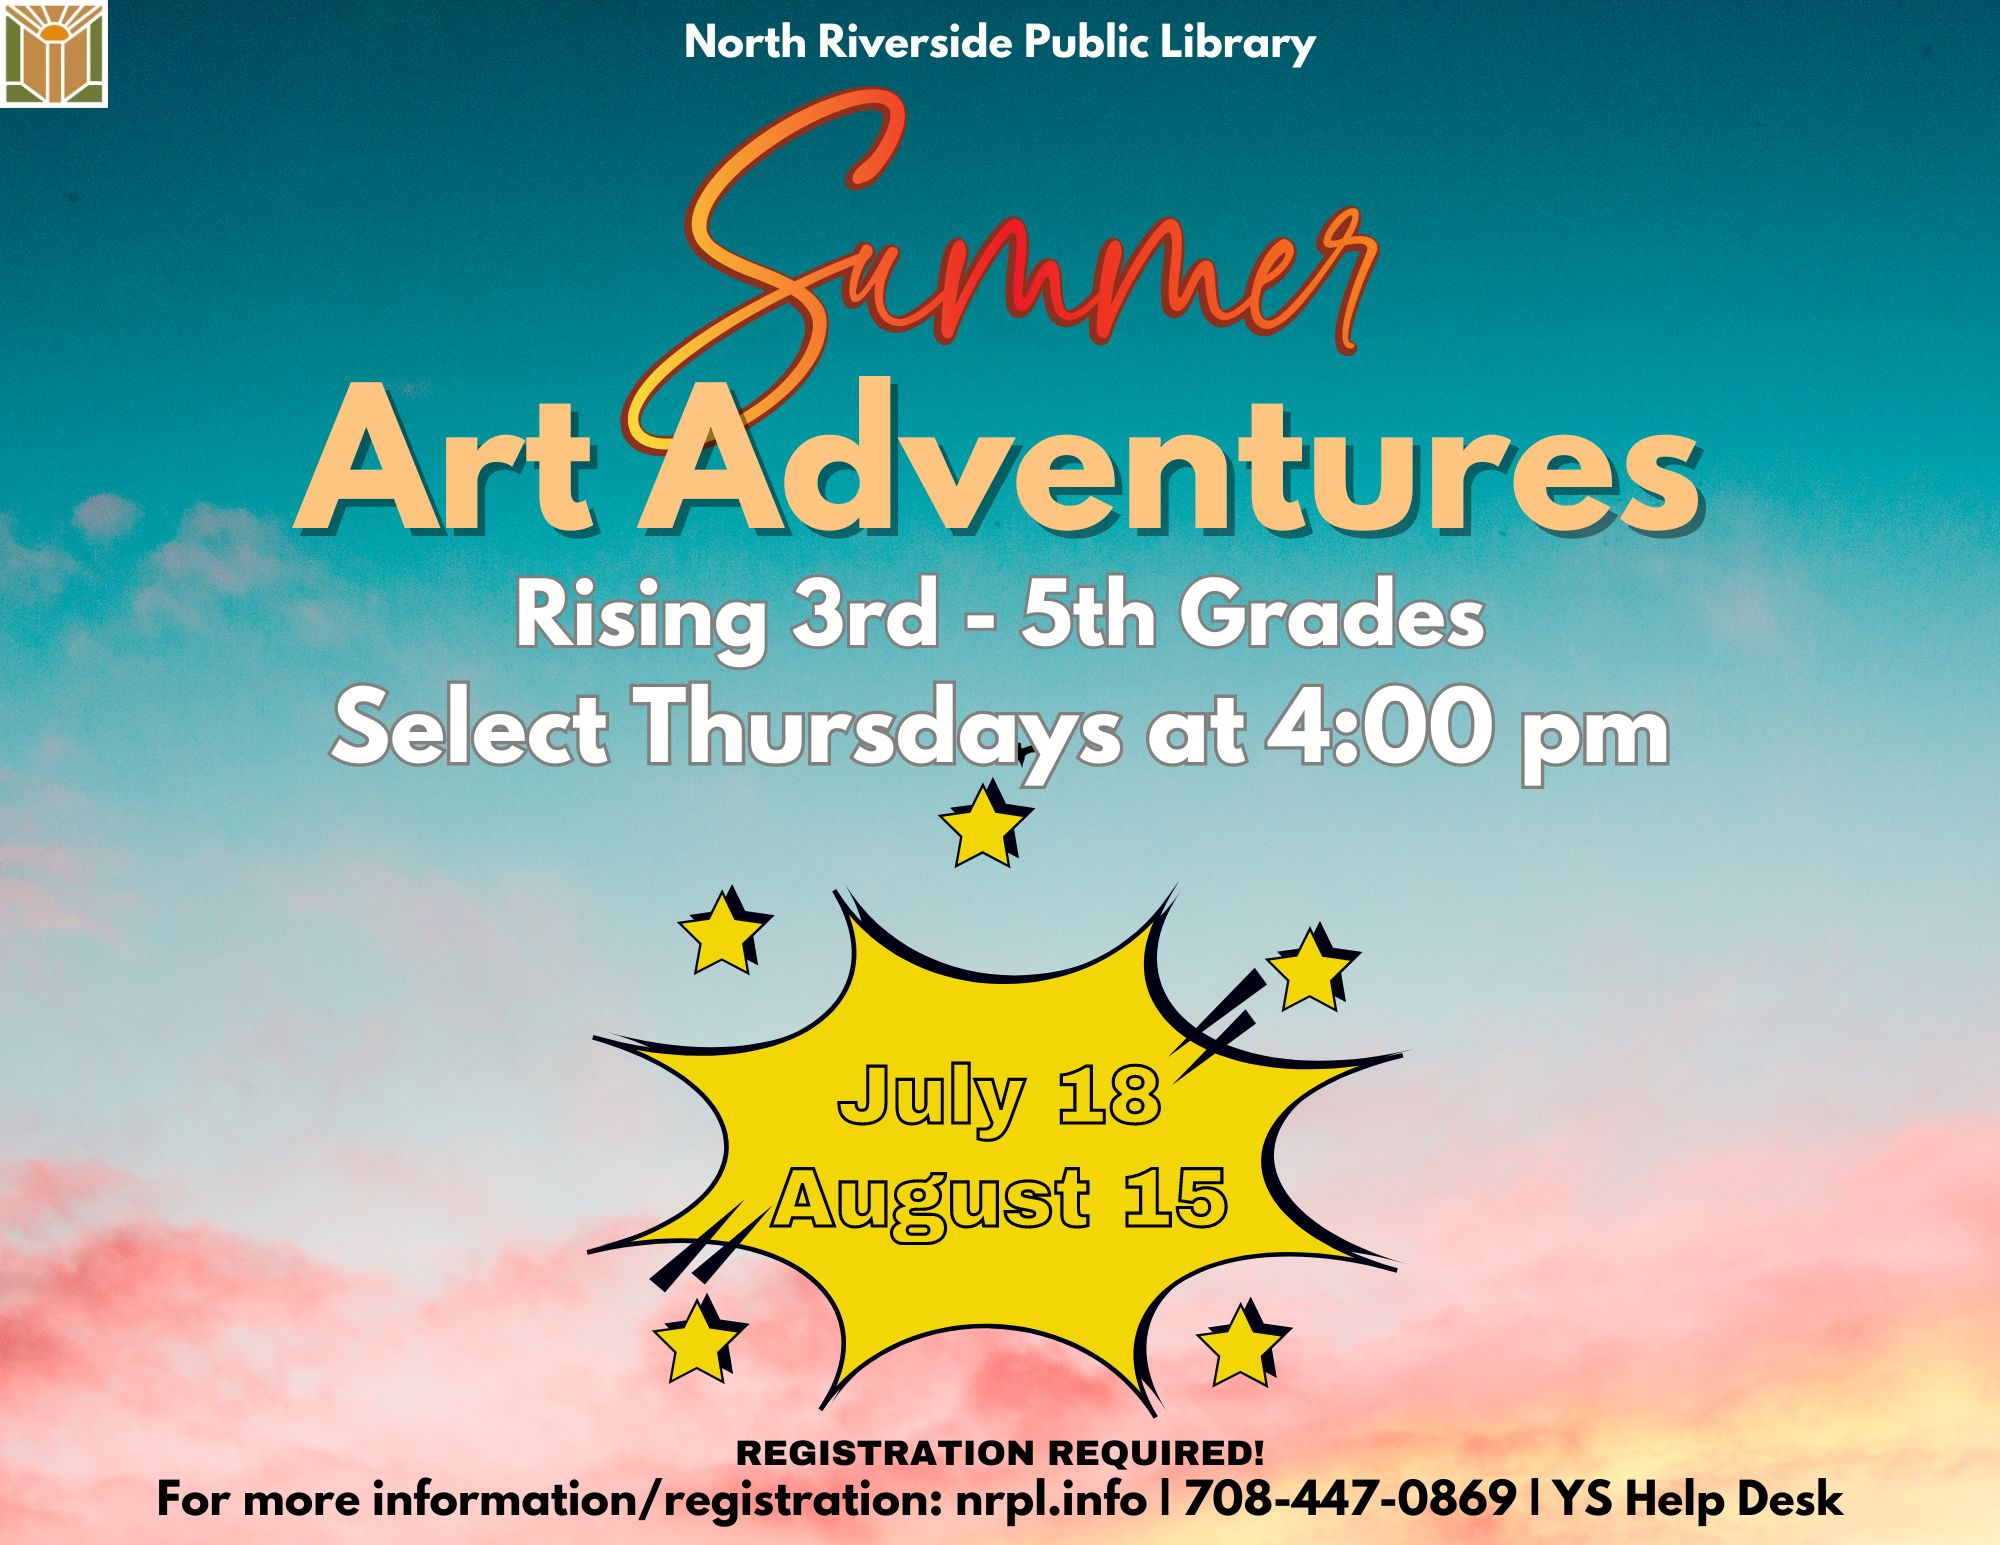 Summer Art Adventures For those starting grades 3-5. Select Thursdays at 4:00pm July 18- Superhero sticker diamond painting. August 15 - Follow along step-by-step painting “Under the Sea”. Registration required.